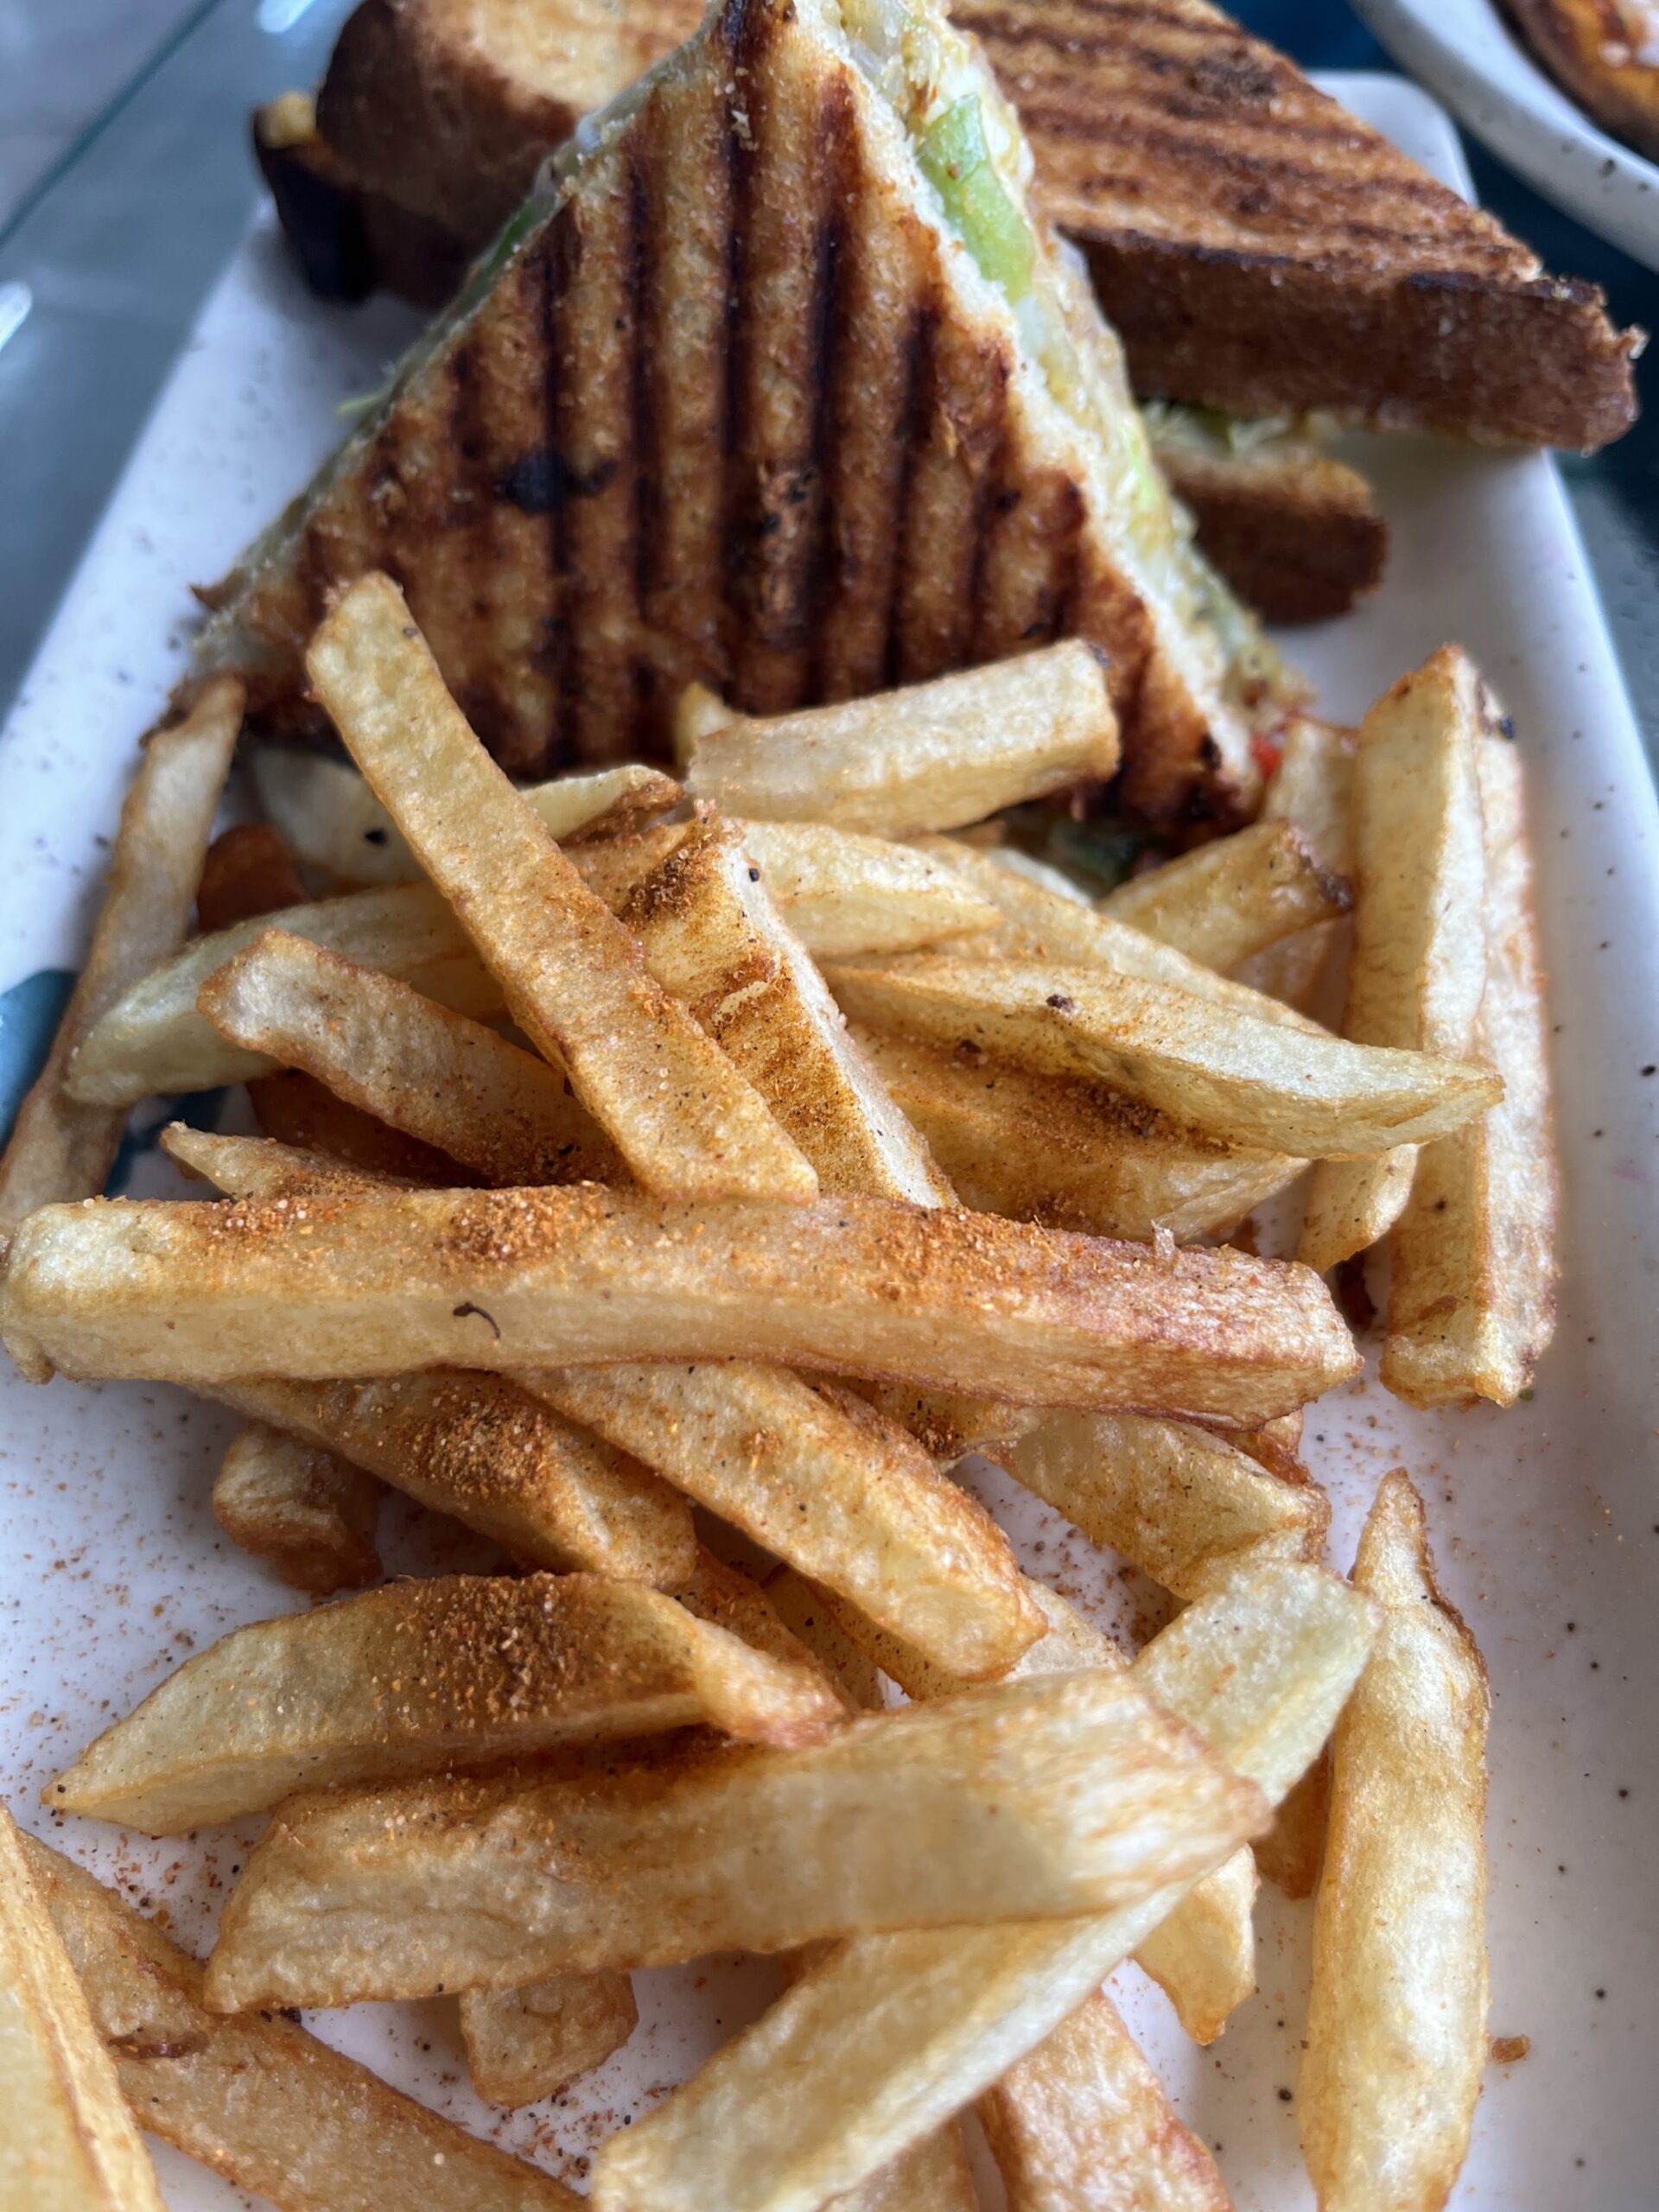 Grill Sandwich with French Fries - one of the popular dishes served at Mapro Cafe